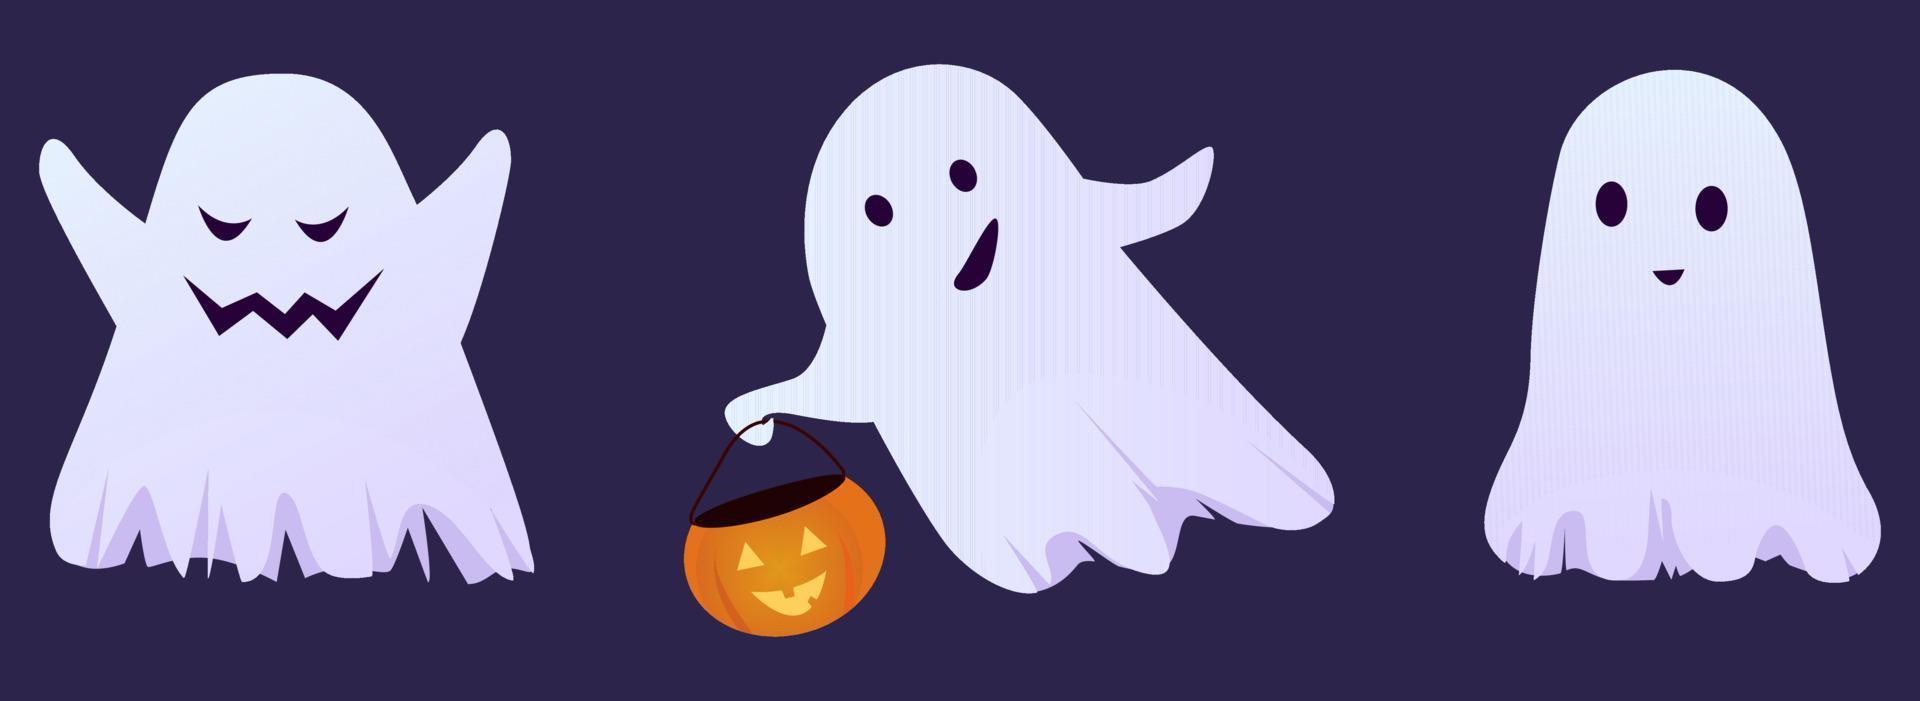 Set of cute funny happy ghosts. Childish spooky boo characters for kids. Magic scary spirits with different emotions and face expressions. Isolated flat cartoon vector illustrations of comic phantoms.